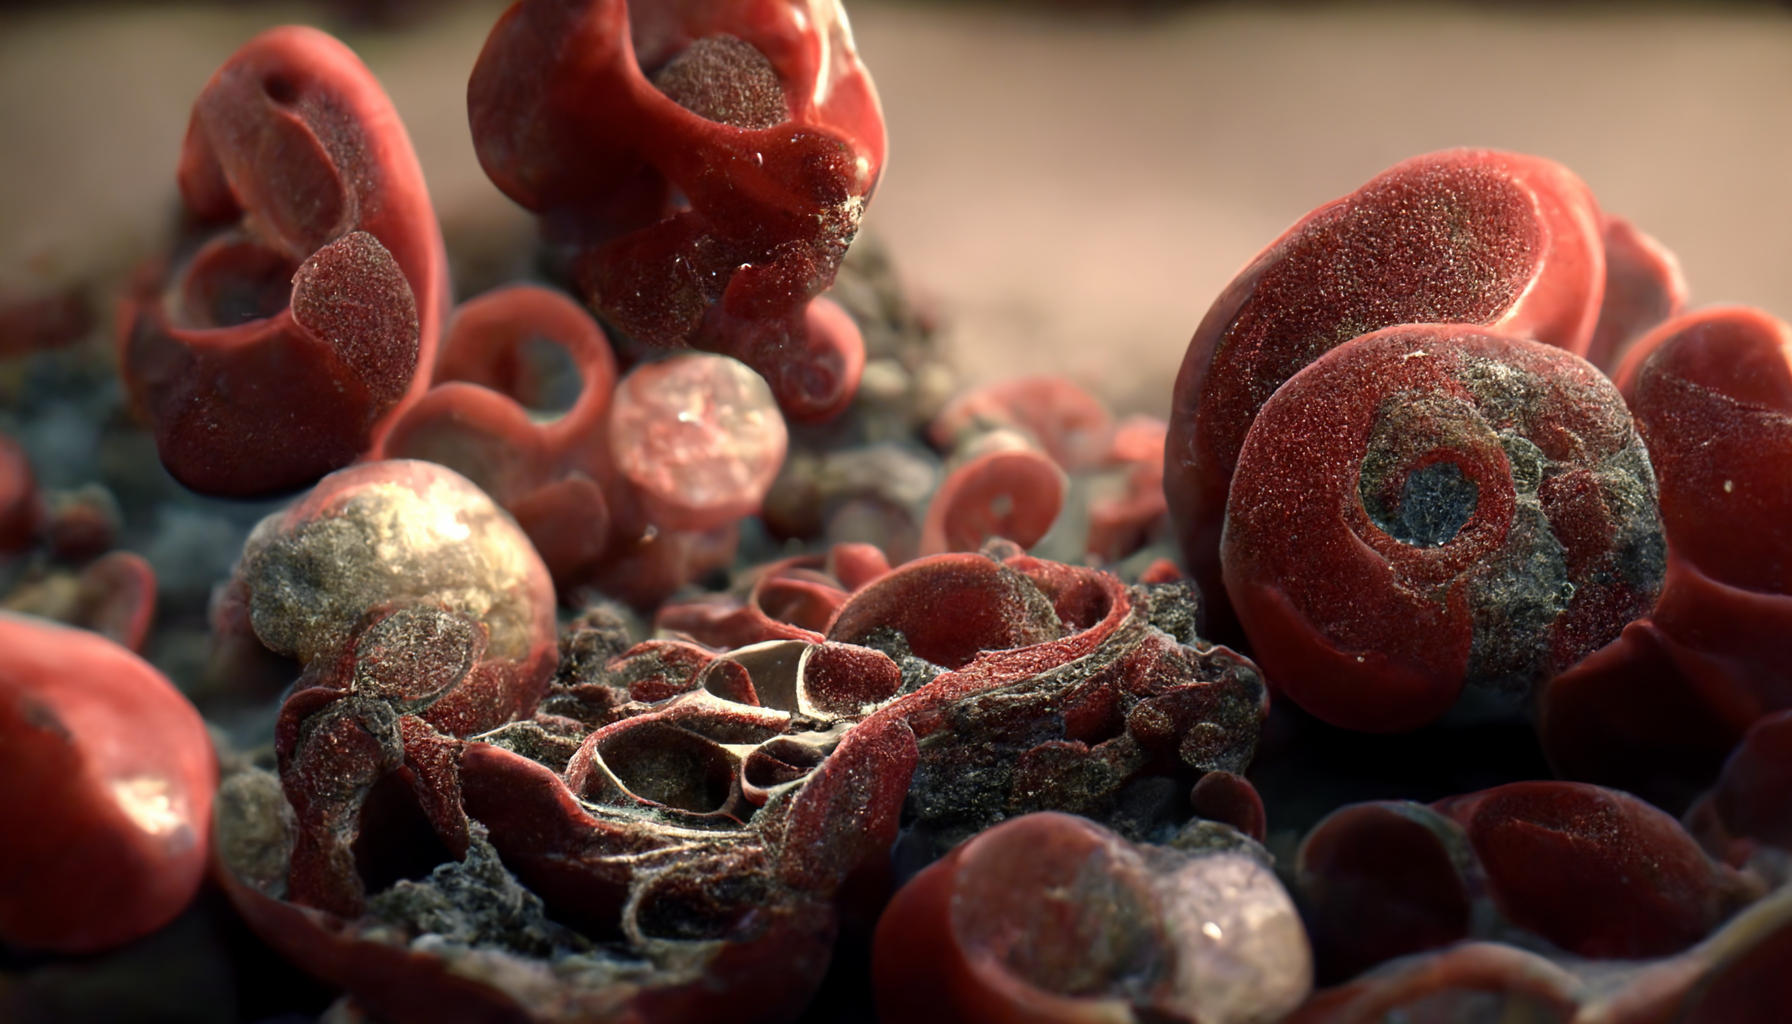 Christopher_A_erythrocyte_in_the_body_high_detail_8K_rendered_i_18053d0a-4f9c-4ddb-88ae-002381278bd0.png